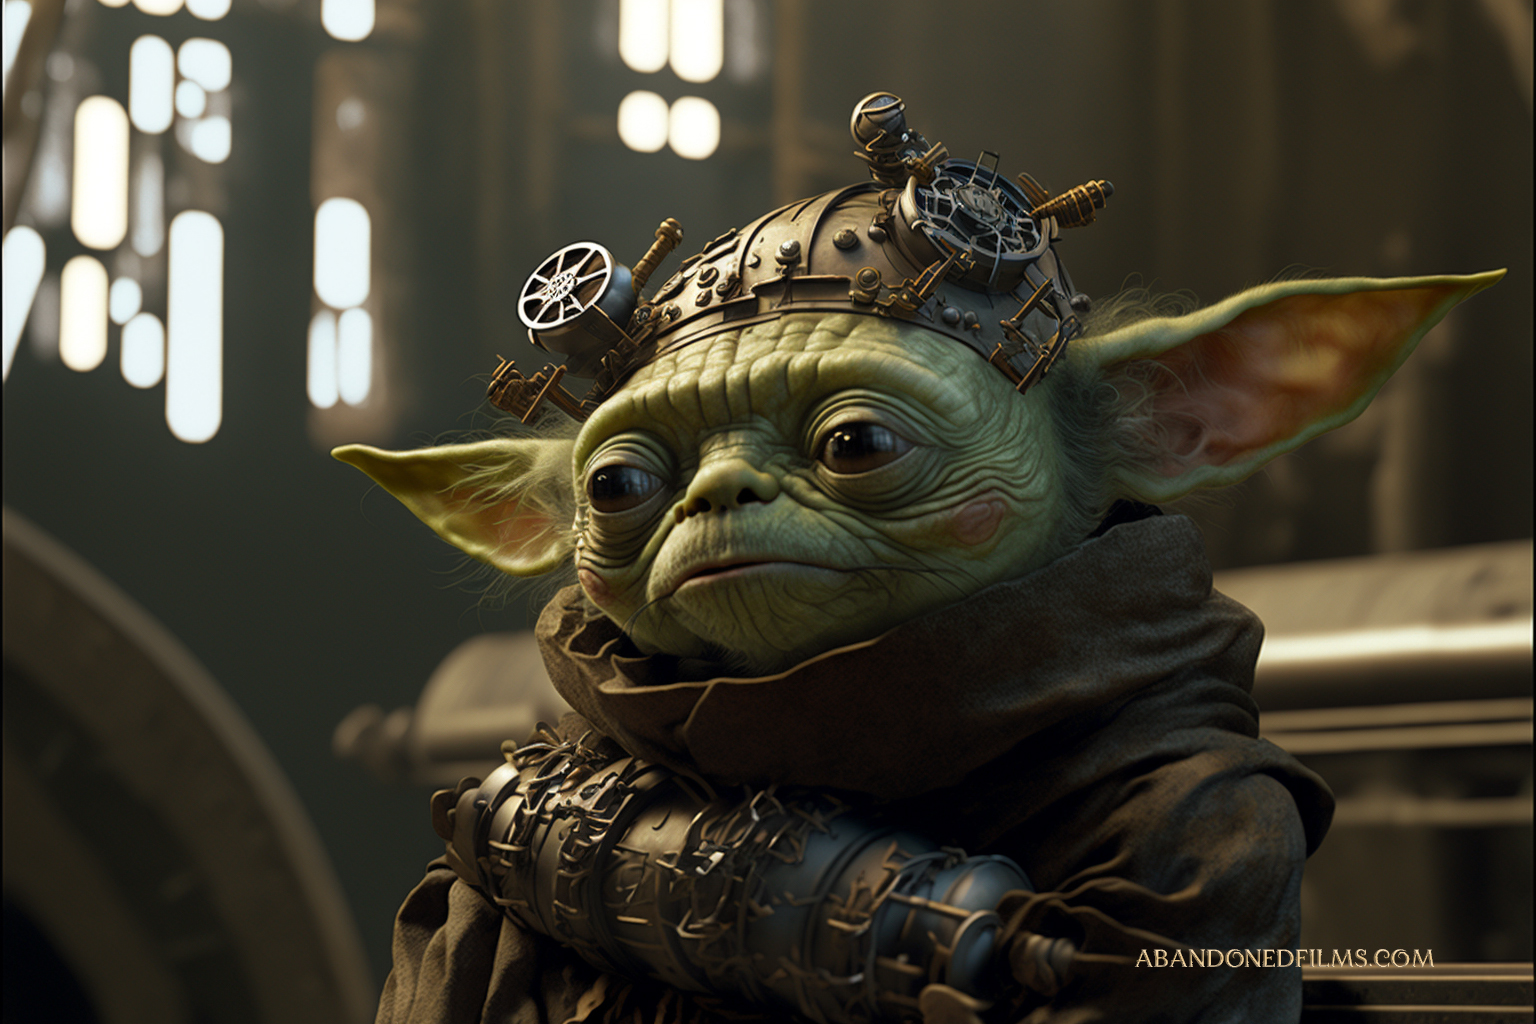 Neural network depicts planets and iconic Star Wars characters in steampunk style-9